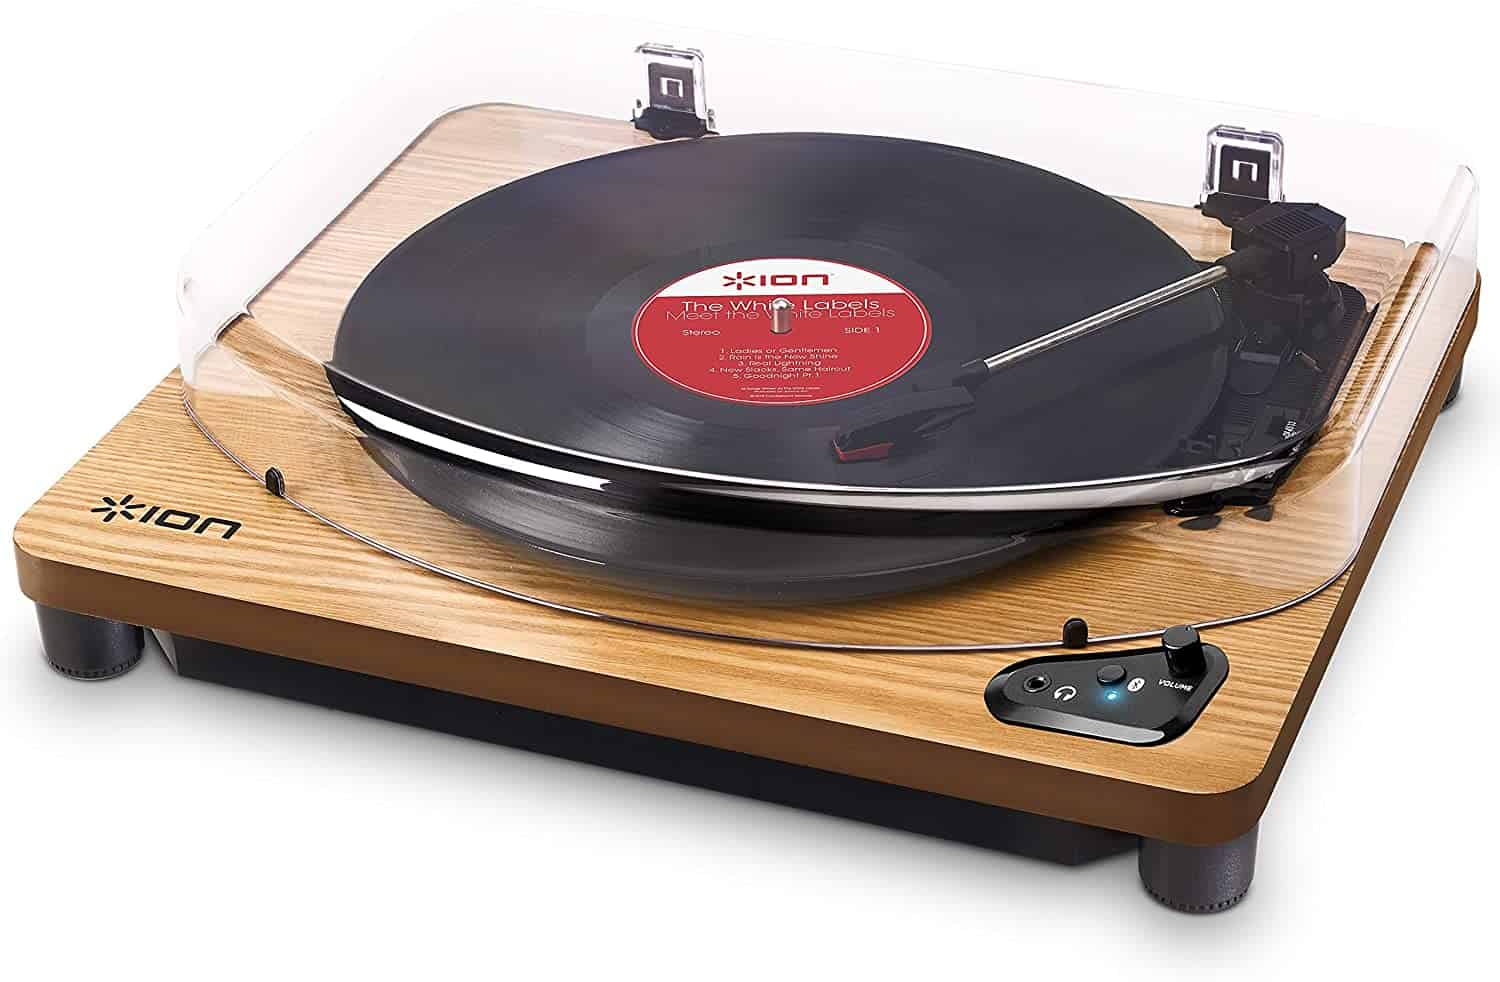 Best Record Player Under £100 UK